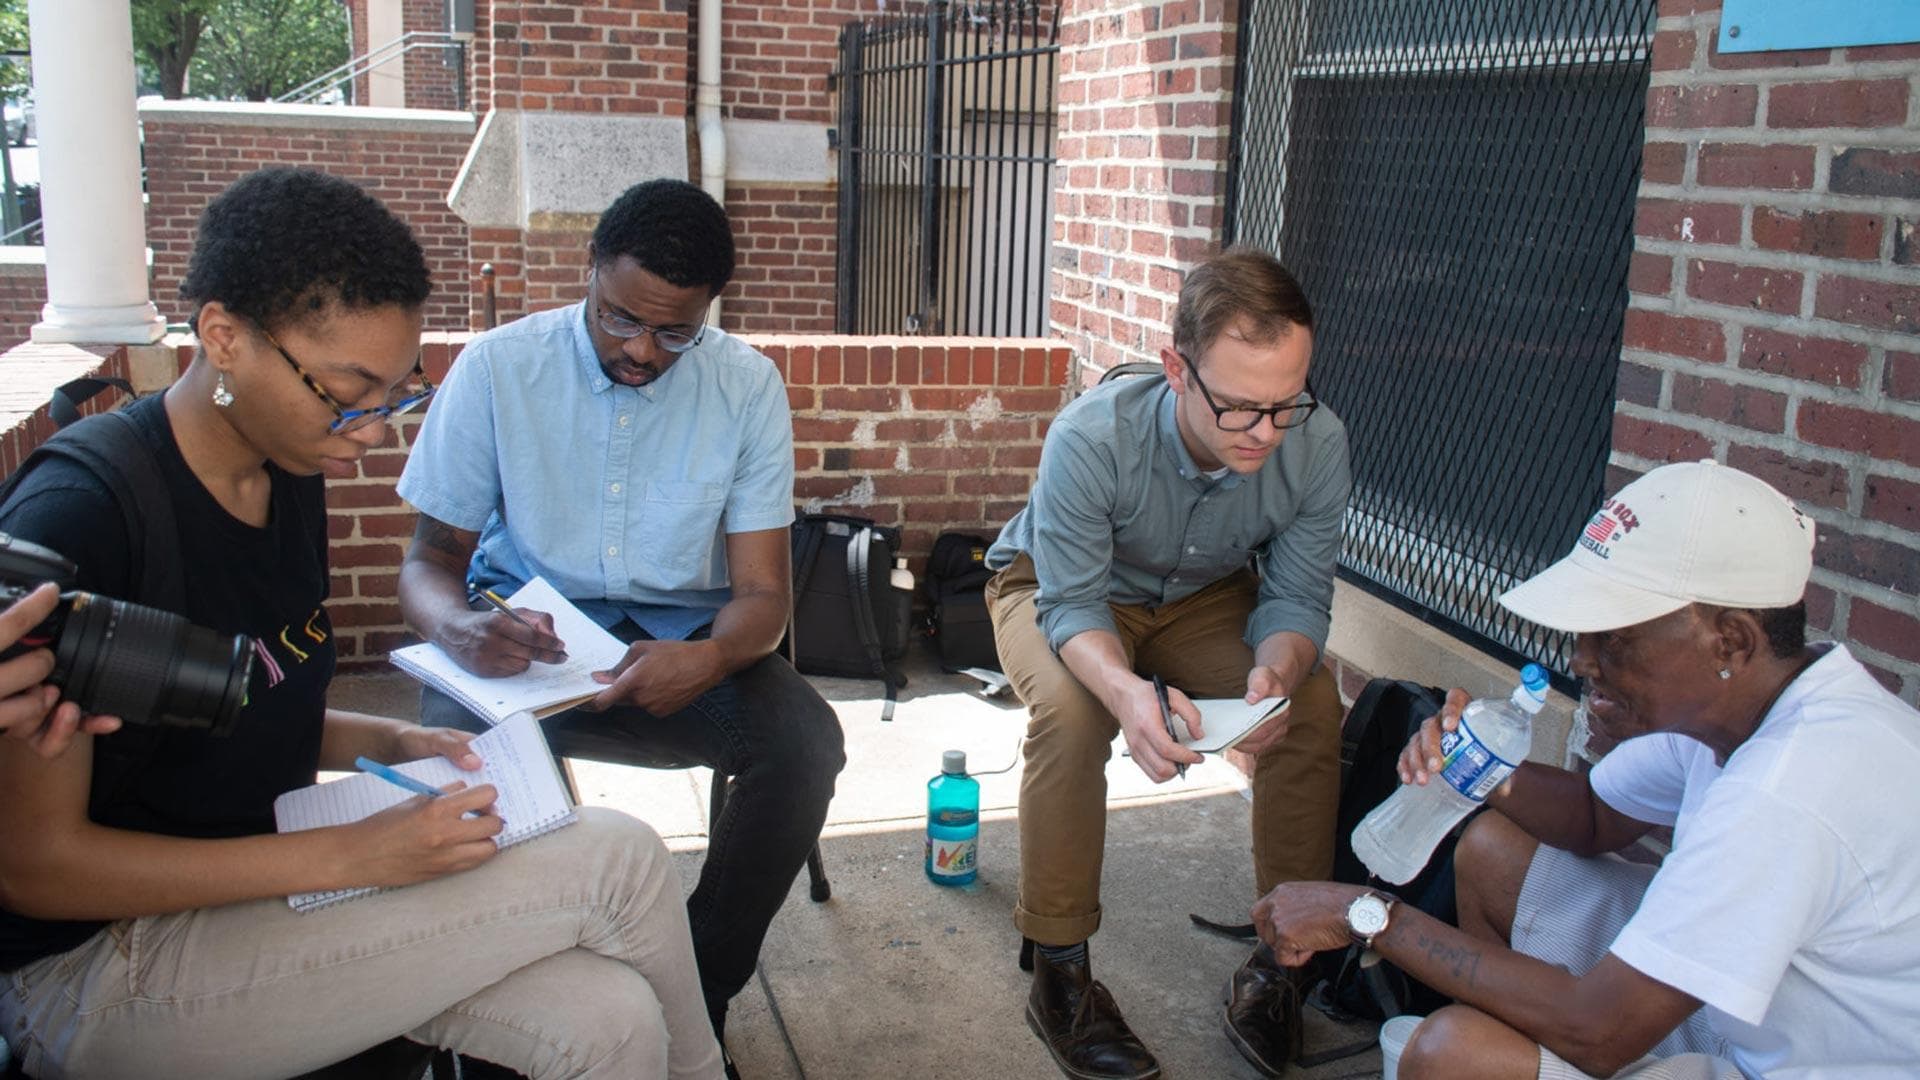 Student journalists interview source on porch